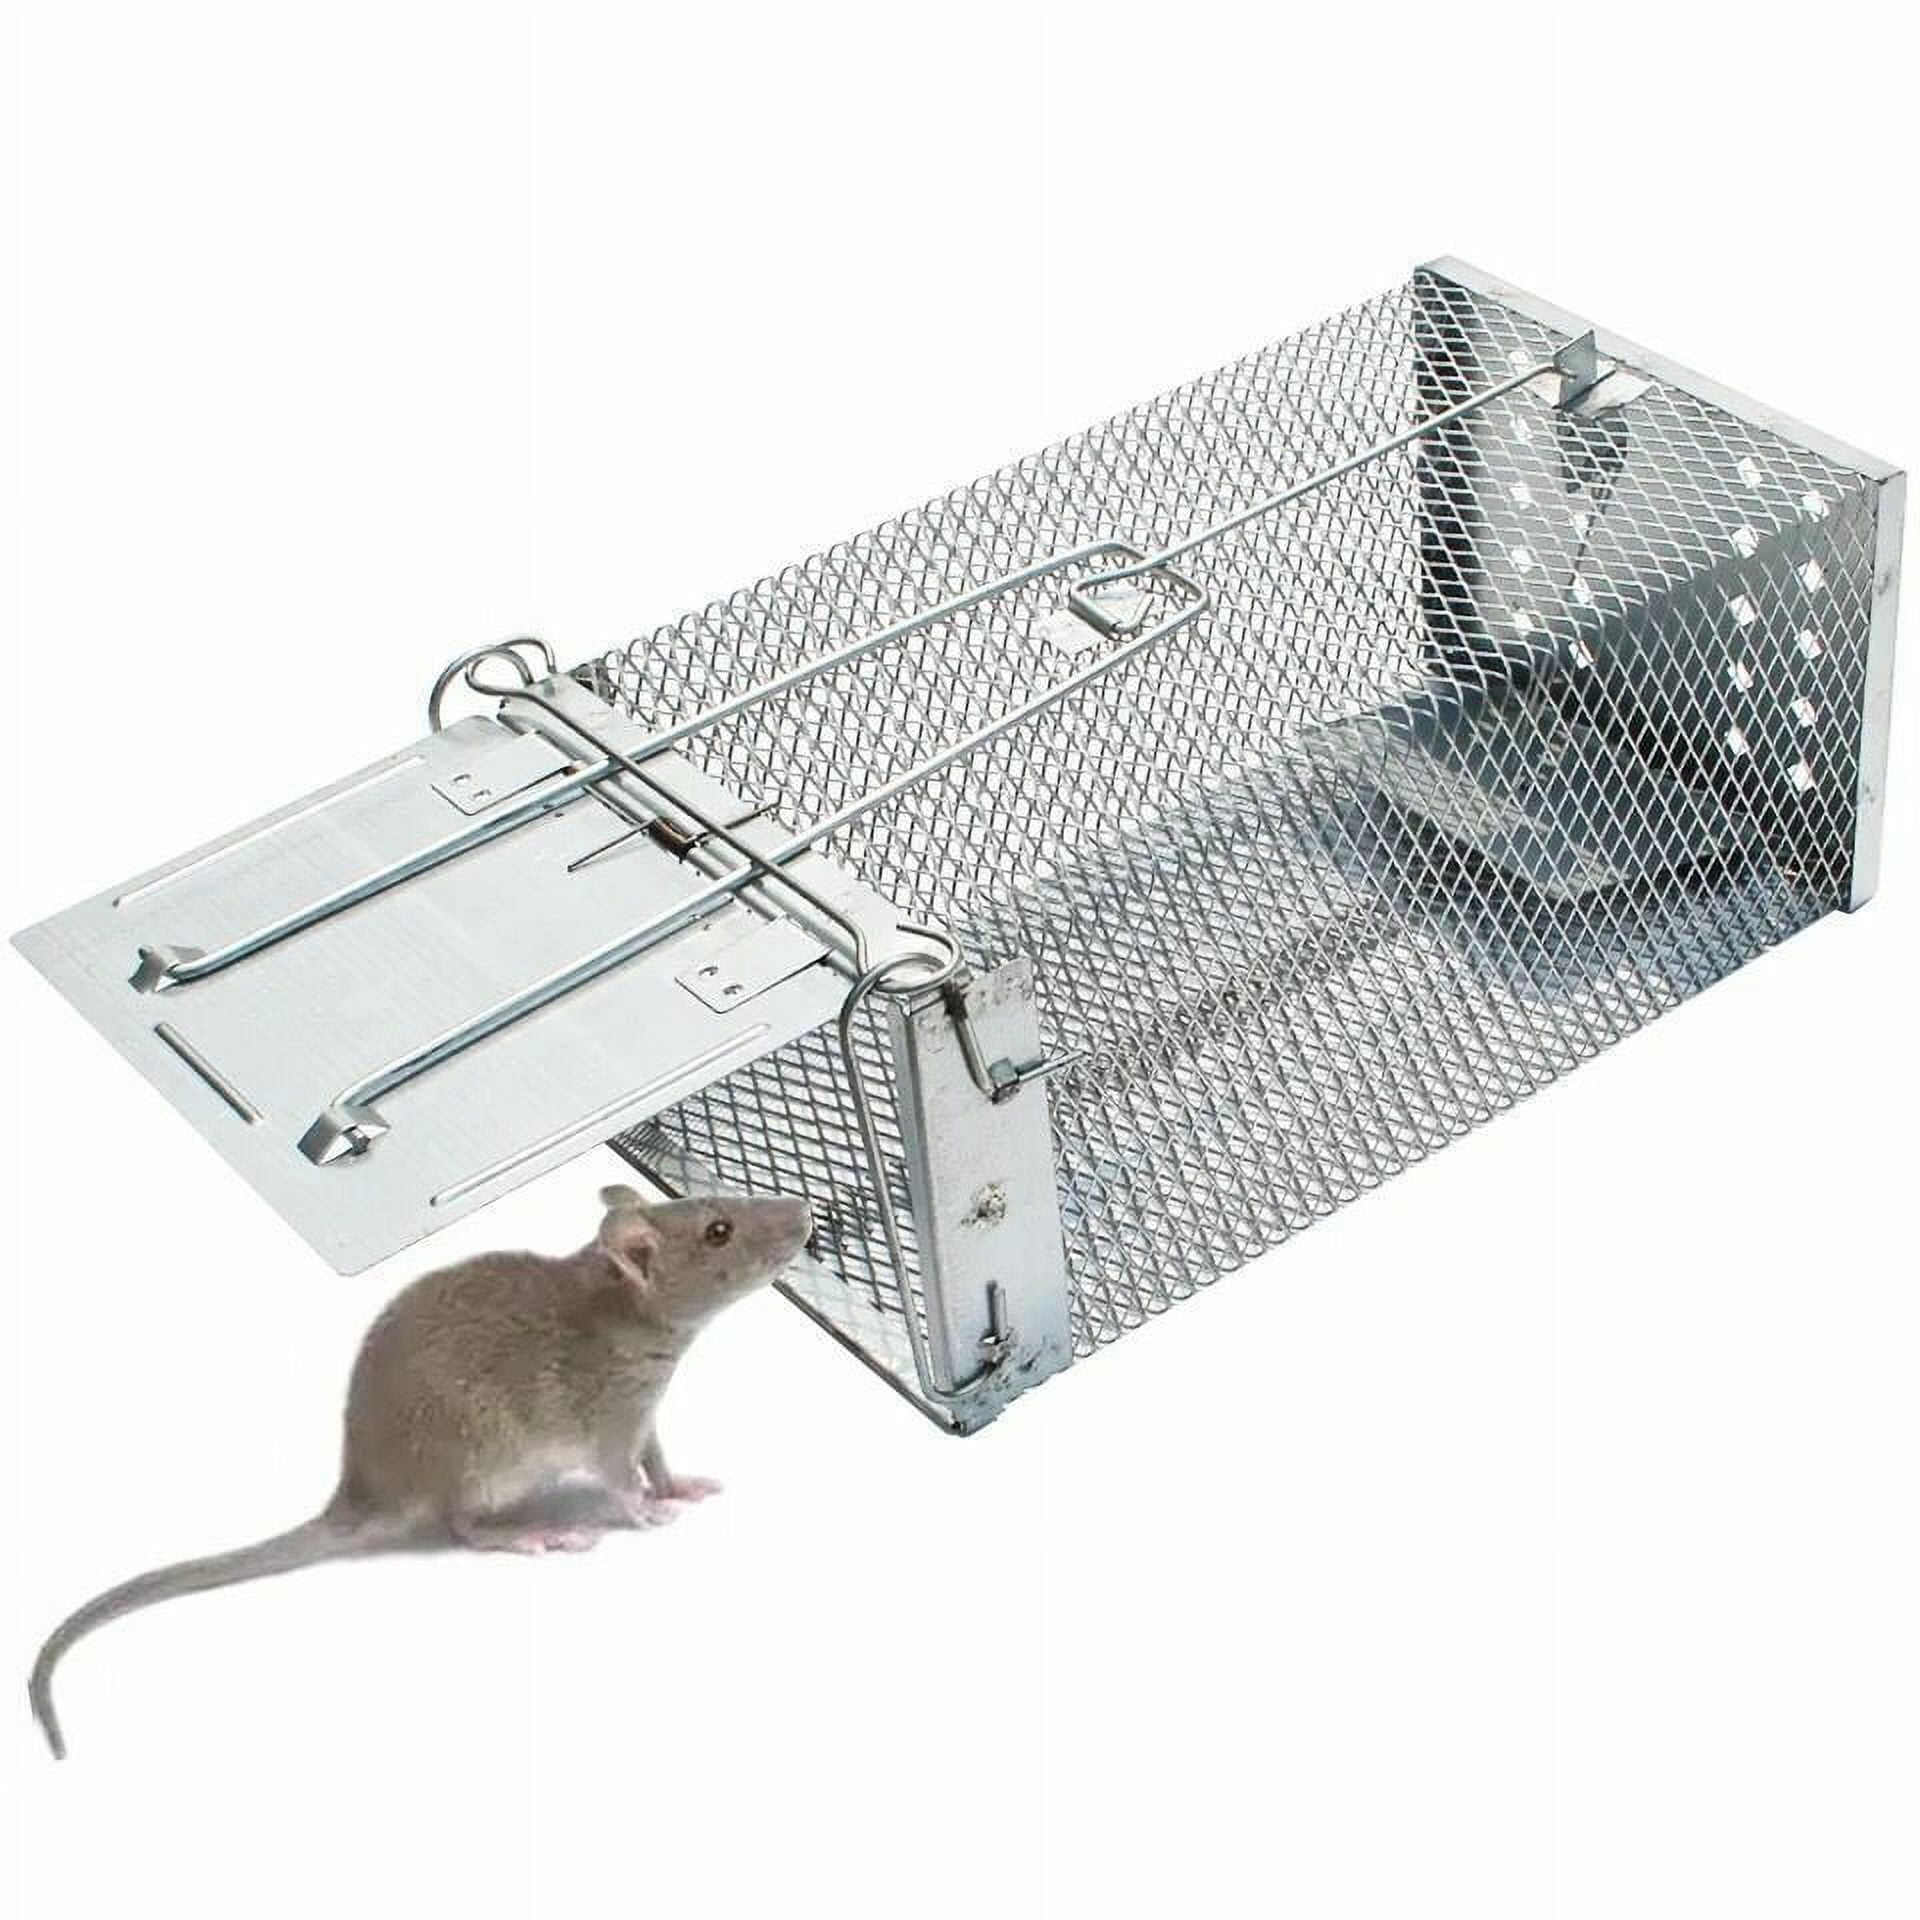 5x Humane Mice Trap Reusable Safe Catching Metal Mouse Multi Live